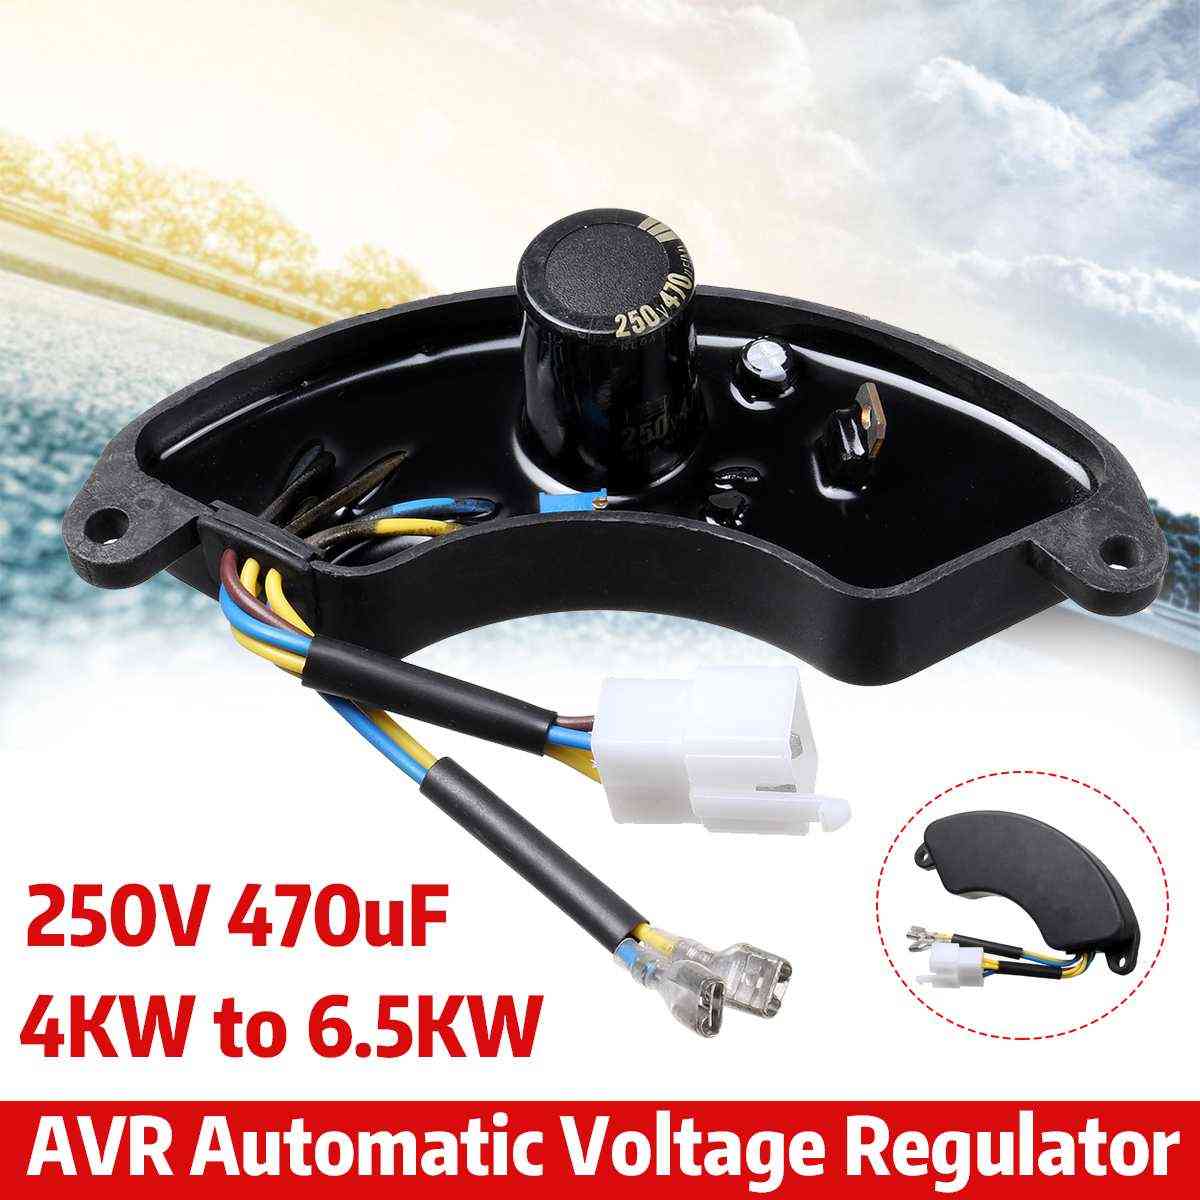 Avr Automatic Voltage Regulator Single Phase Rectifier